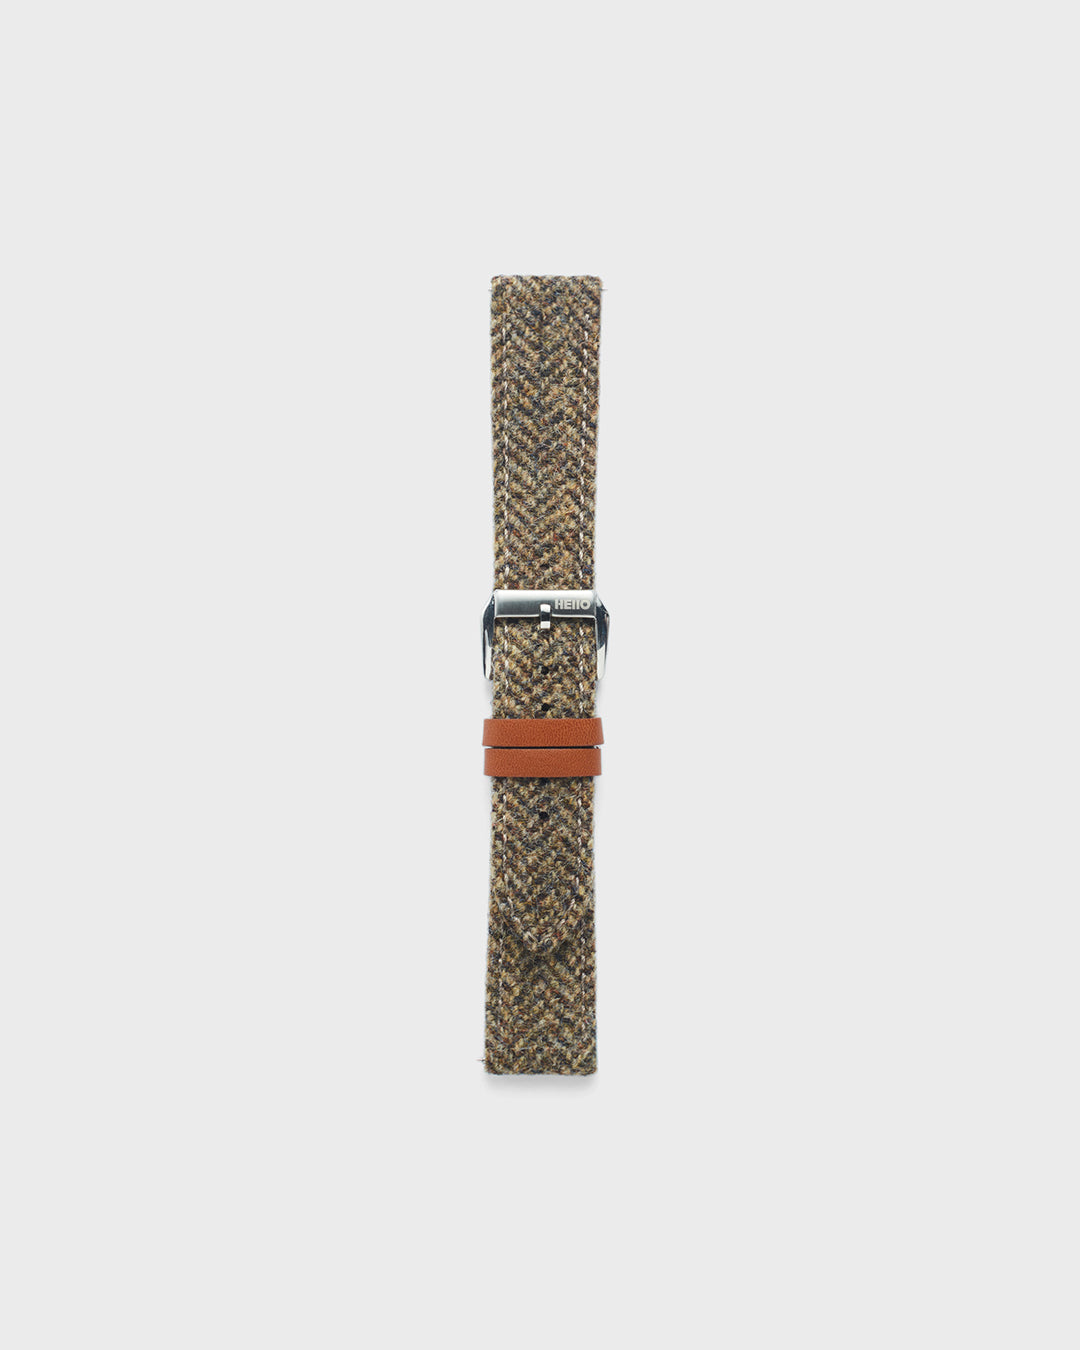 EMBRACE STRAP - FOR QUARTZ, MECHANICAL & SMART WATCHES [Parade Stitch in Harris Tweed] HEllO